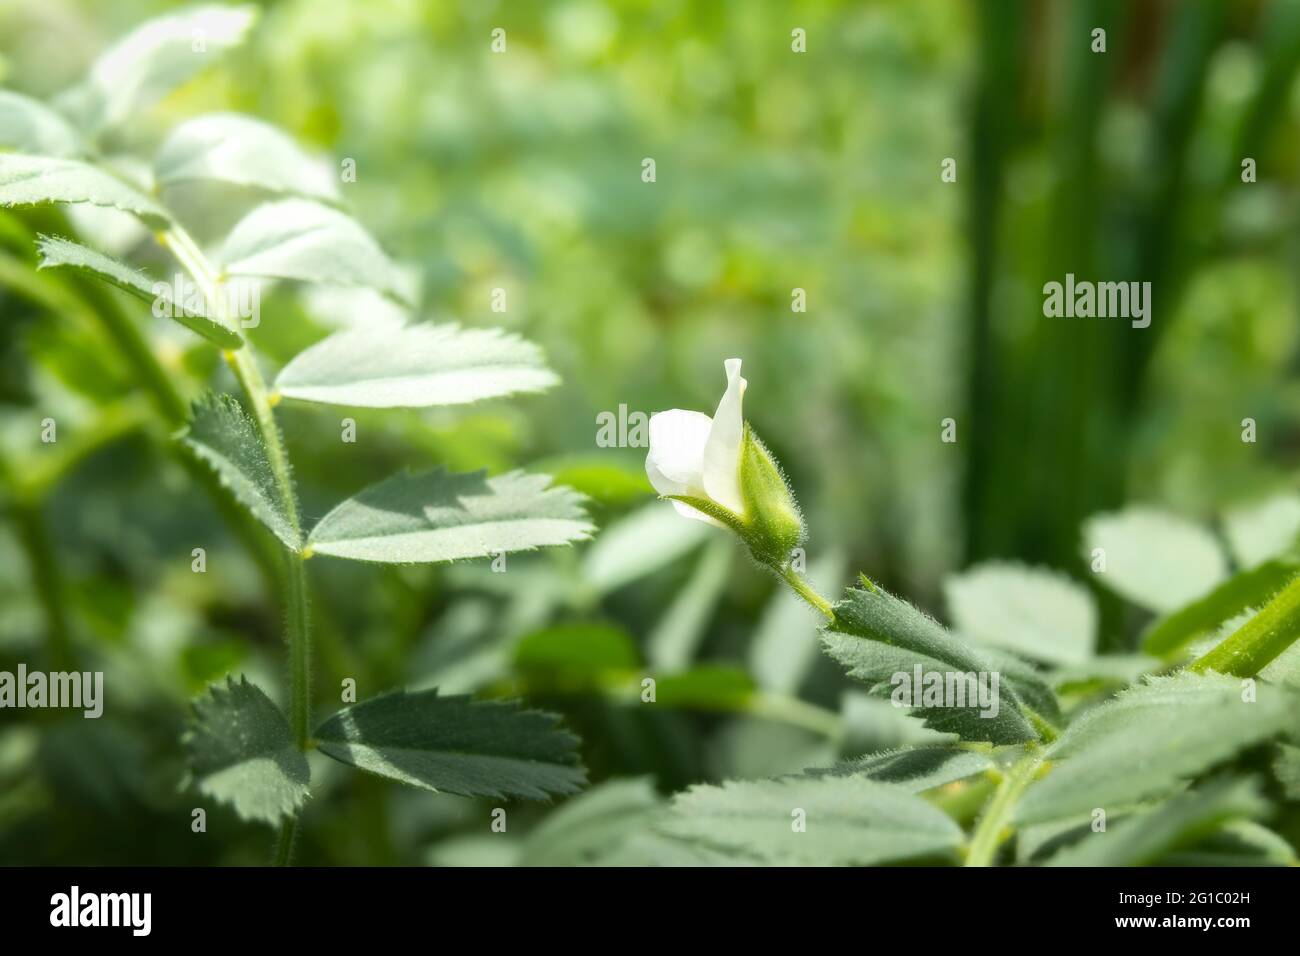 Kabuli chickpeas flower on plant in garden. Stunning tiny white flower in sunlight. Known as bengal gram, garbanzo bean or cicer arietinum. Selective Stock Photo